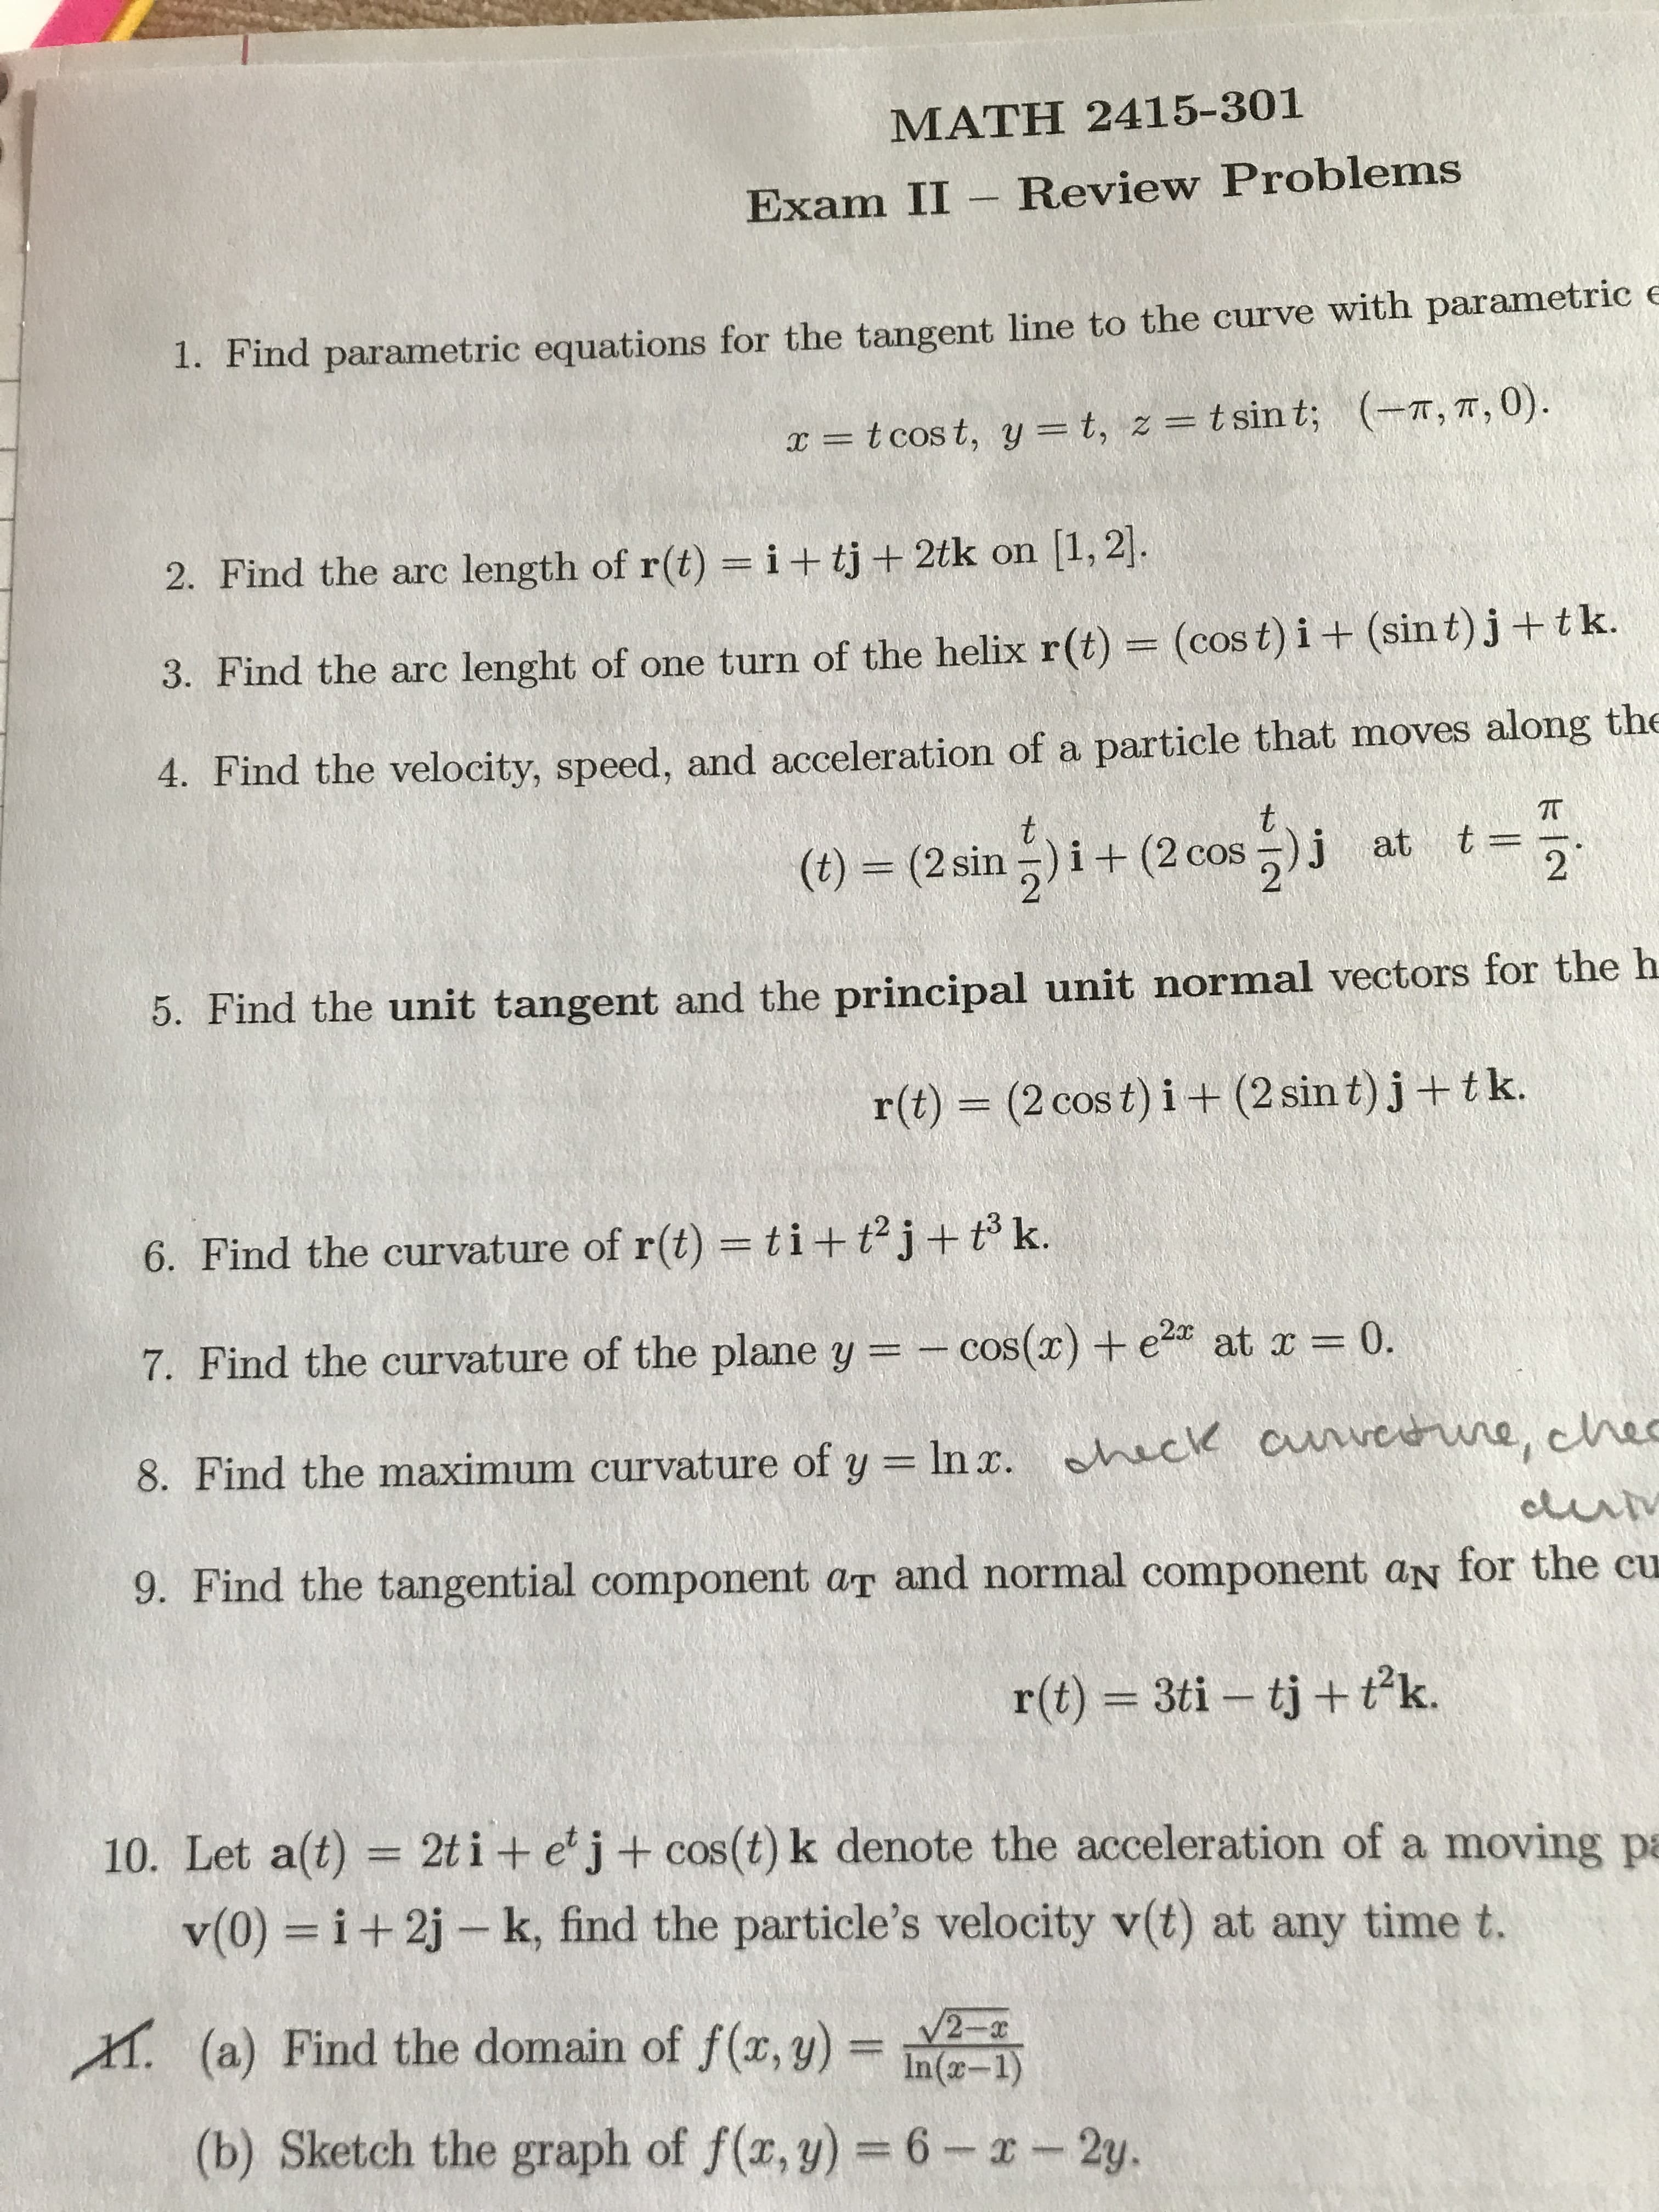 MATH 2415-301
Exam II Review Problems
1. Find parametric equations for the tangent line to the curve with parametric e
= t cos t, y = t, z = tsint; (T, T, 0)
2. Find the arc length of r(t) = i+tj + 2tk on 1, 2.
3. Find the arc lenght of one turn of the helix r(t) = (cos t) i + (sint)j+tk.
particle that moves along the
4. Find the velocity, speed, and acceleration of a
t
t
(t) (2 sin)i+(2 cos )j at t
2
5. Find the unit tangent and the principal unit normal vectors for the h
(2 cos t) i+(2 sin t) j+tk.
r(t)
6. Find the curvature of r(t) = ti+ t2j + t k.
7. Find the curvature of the plane y = cos(r) + e2 at r
0.
8. Find the maximum curvature of y In x. hac cunvedune, hec
eluriv
9. Find the tangential component ar and normal component aN for the cu
r(t) 3ti tj+tk.
10. Let a(t)
2t i + e'j+ cos (t) k denote the acceleration of a moving pa
i+2j- k, find the particle's velocity v(t) at any time t.
v(0)
M (a) Find the domain of f(x, y)
V2-
In(-1)
(b) Sketch the graph of f(x, y) =6-x-2y.
